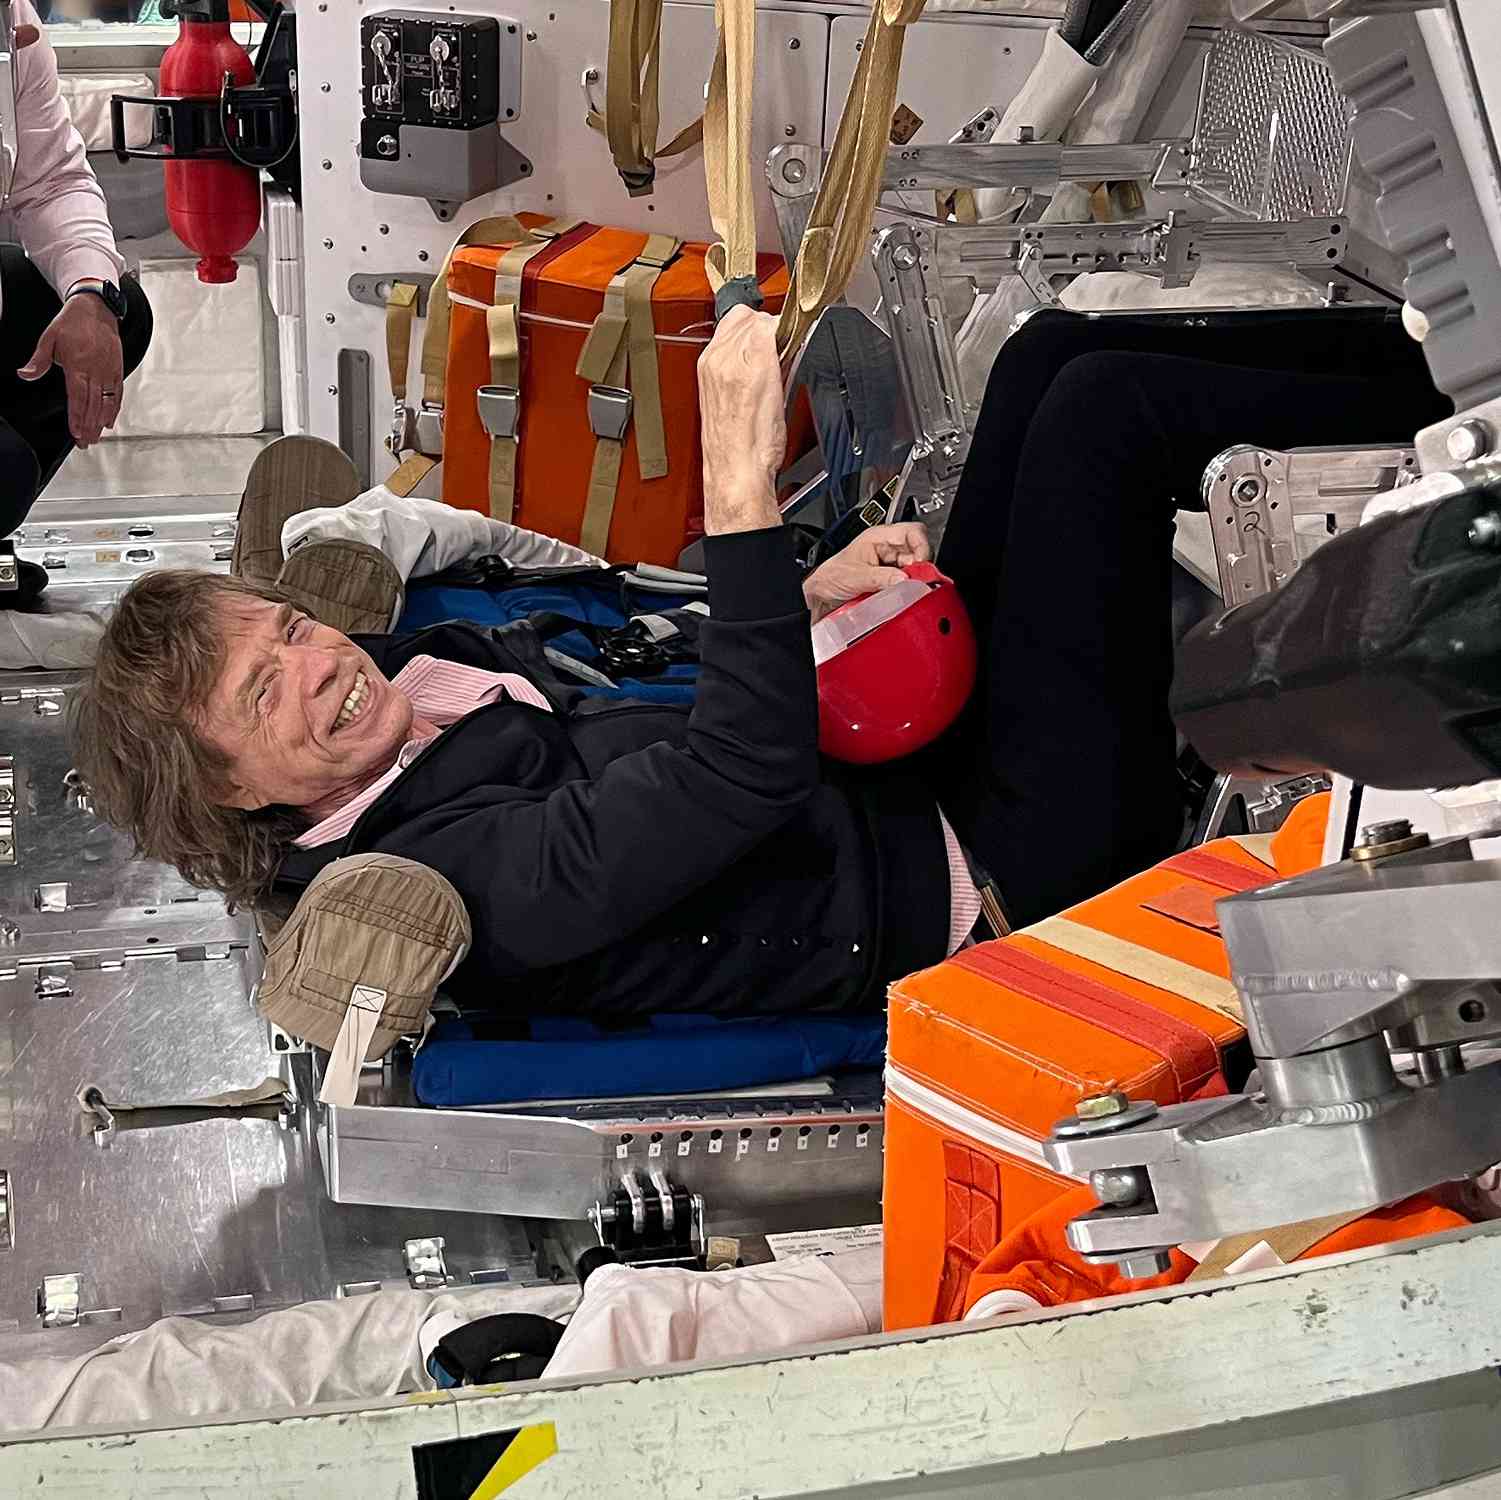 Mick Jagger stops by NASA Headquarters while in Houston for kick-off of The Rolling Stones out-of-this-world stadium tour